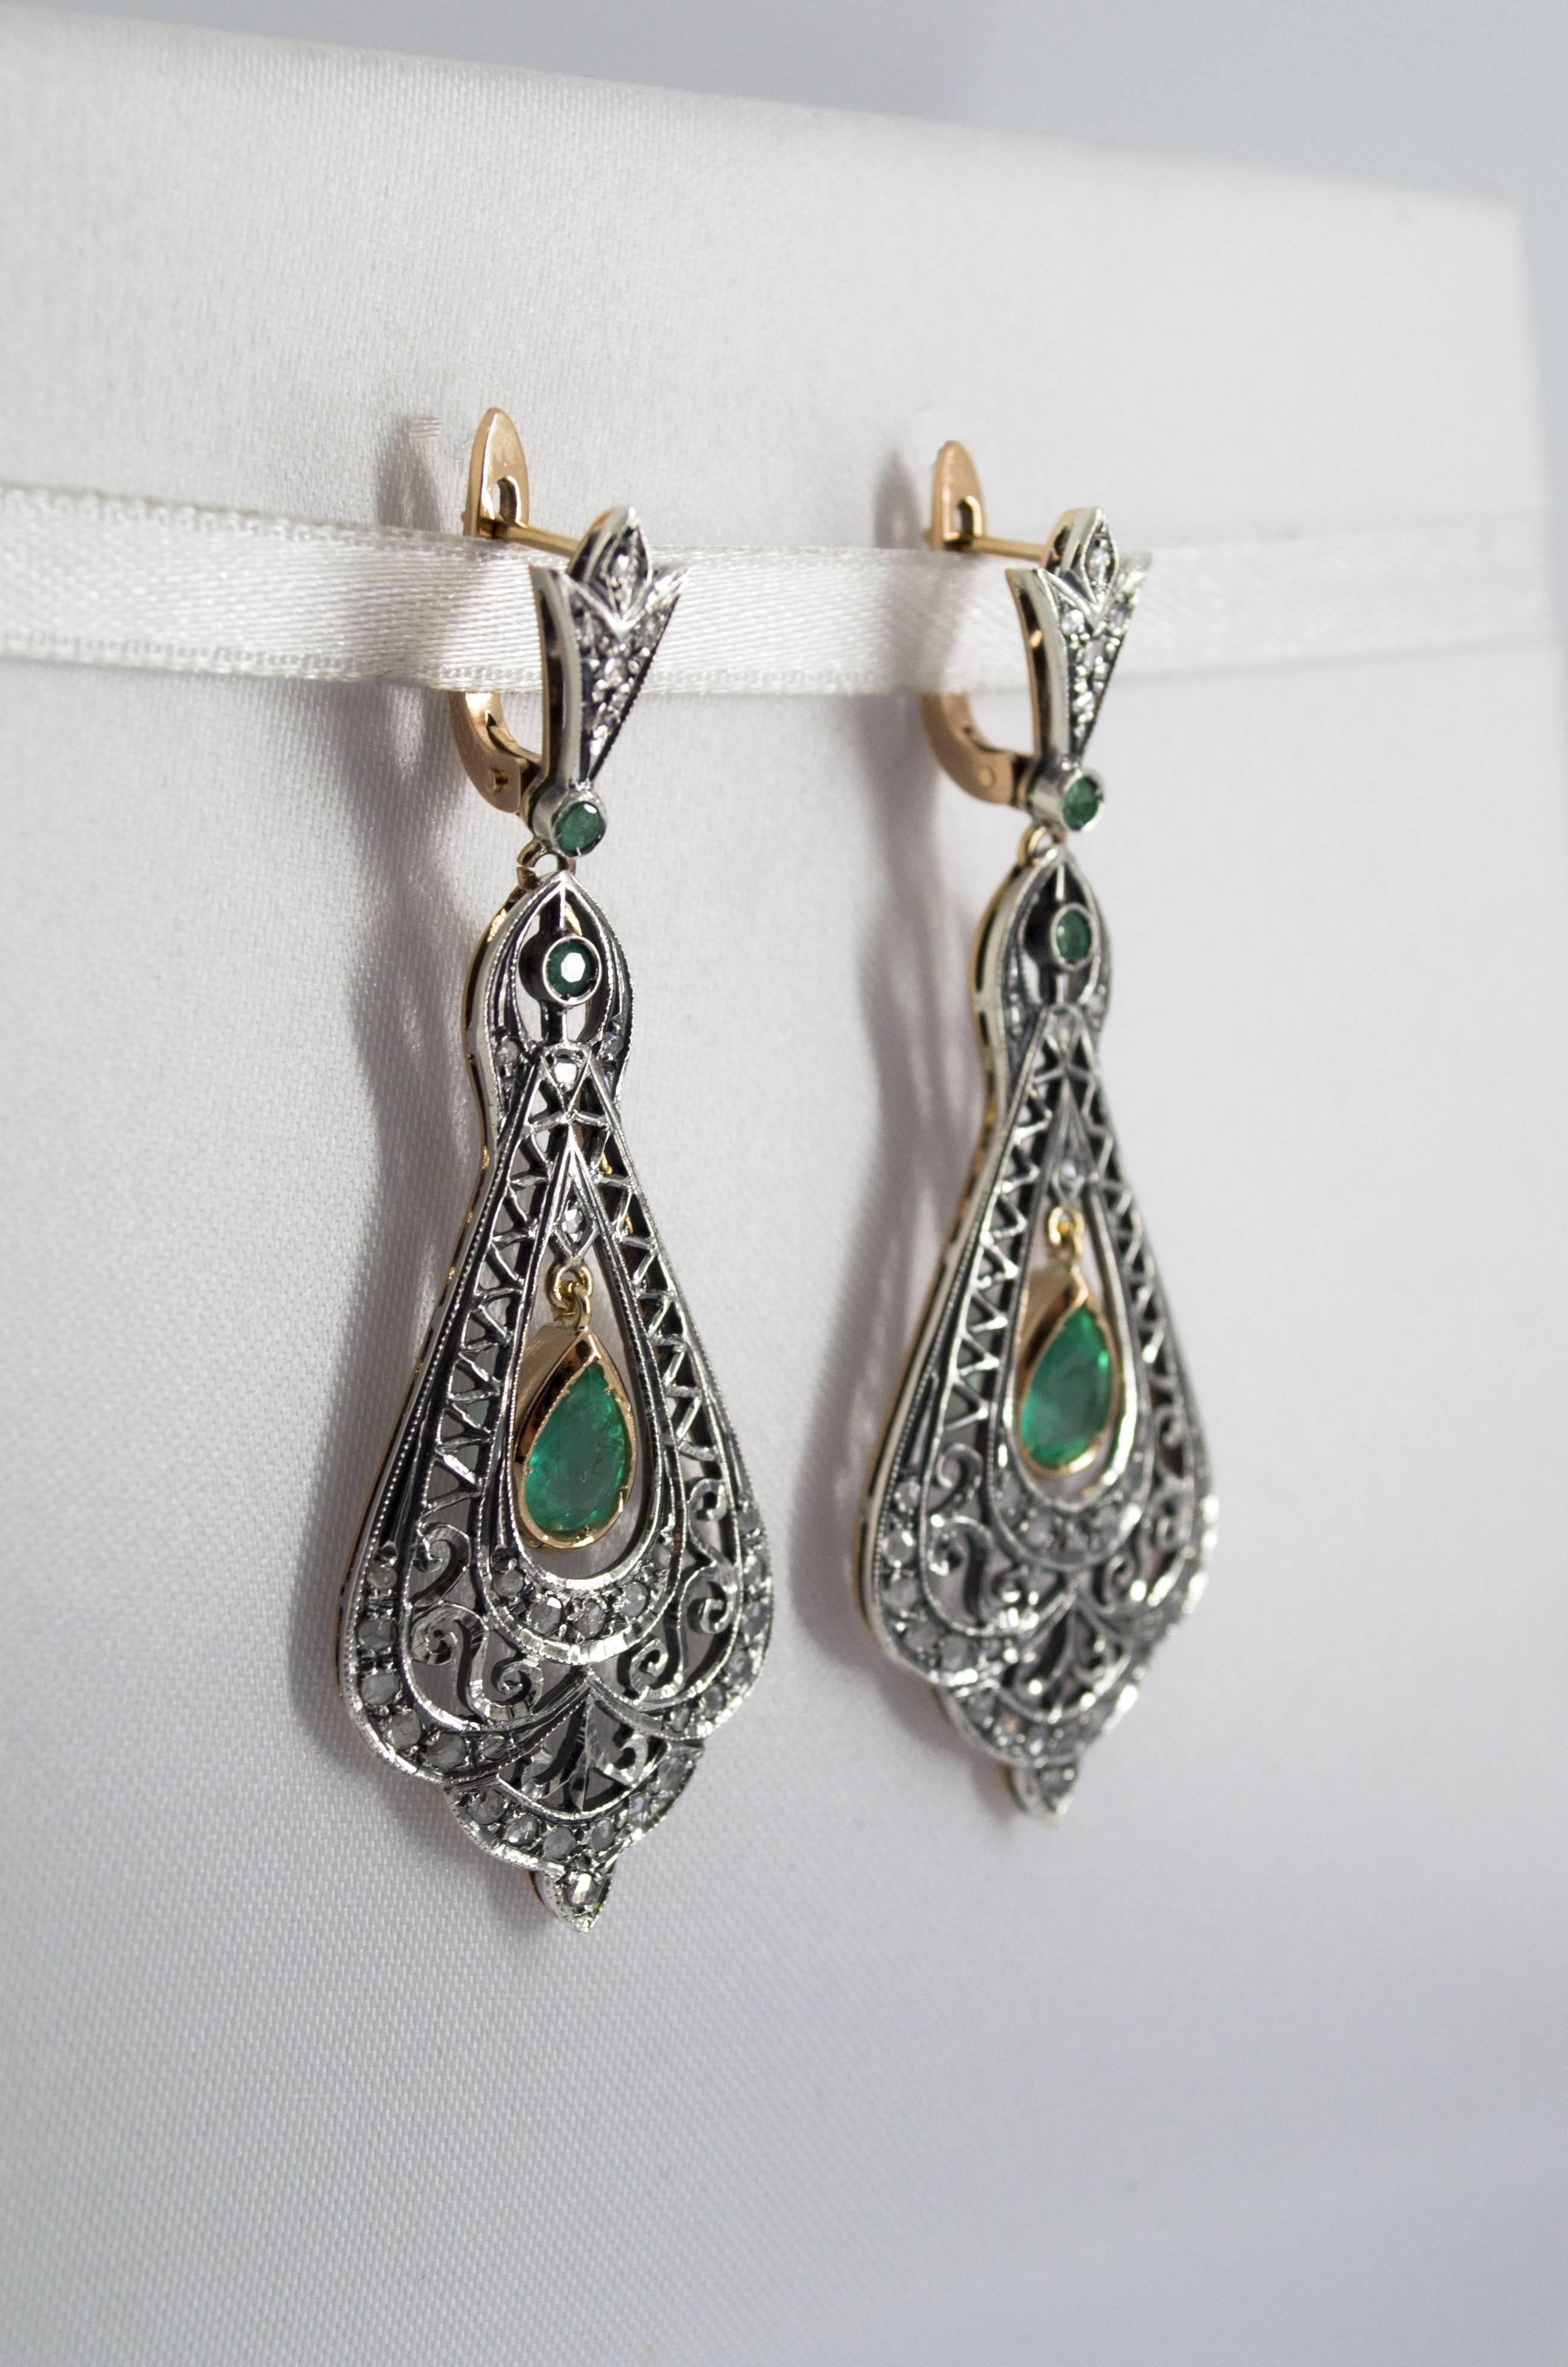 These Earrings are made of 9K Yellow Gold and Sterling Silver.
These Earrings have 0.50 Carats of White Diamonds.
These Earrings have 2.20 Carats of Emeralds.
All our Earrings have pins for pierced ears but we can change the closure and make any of